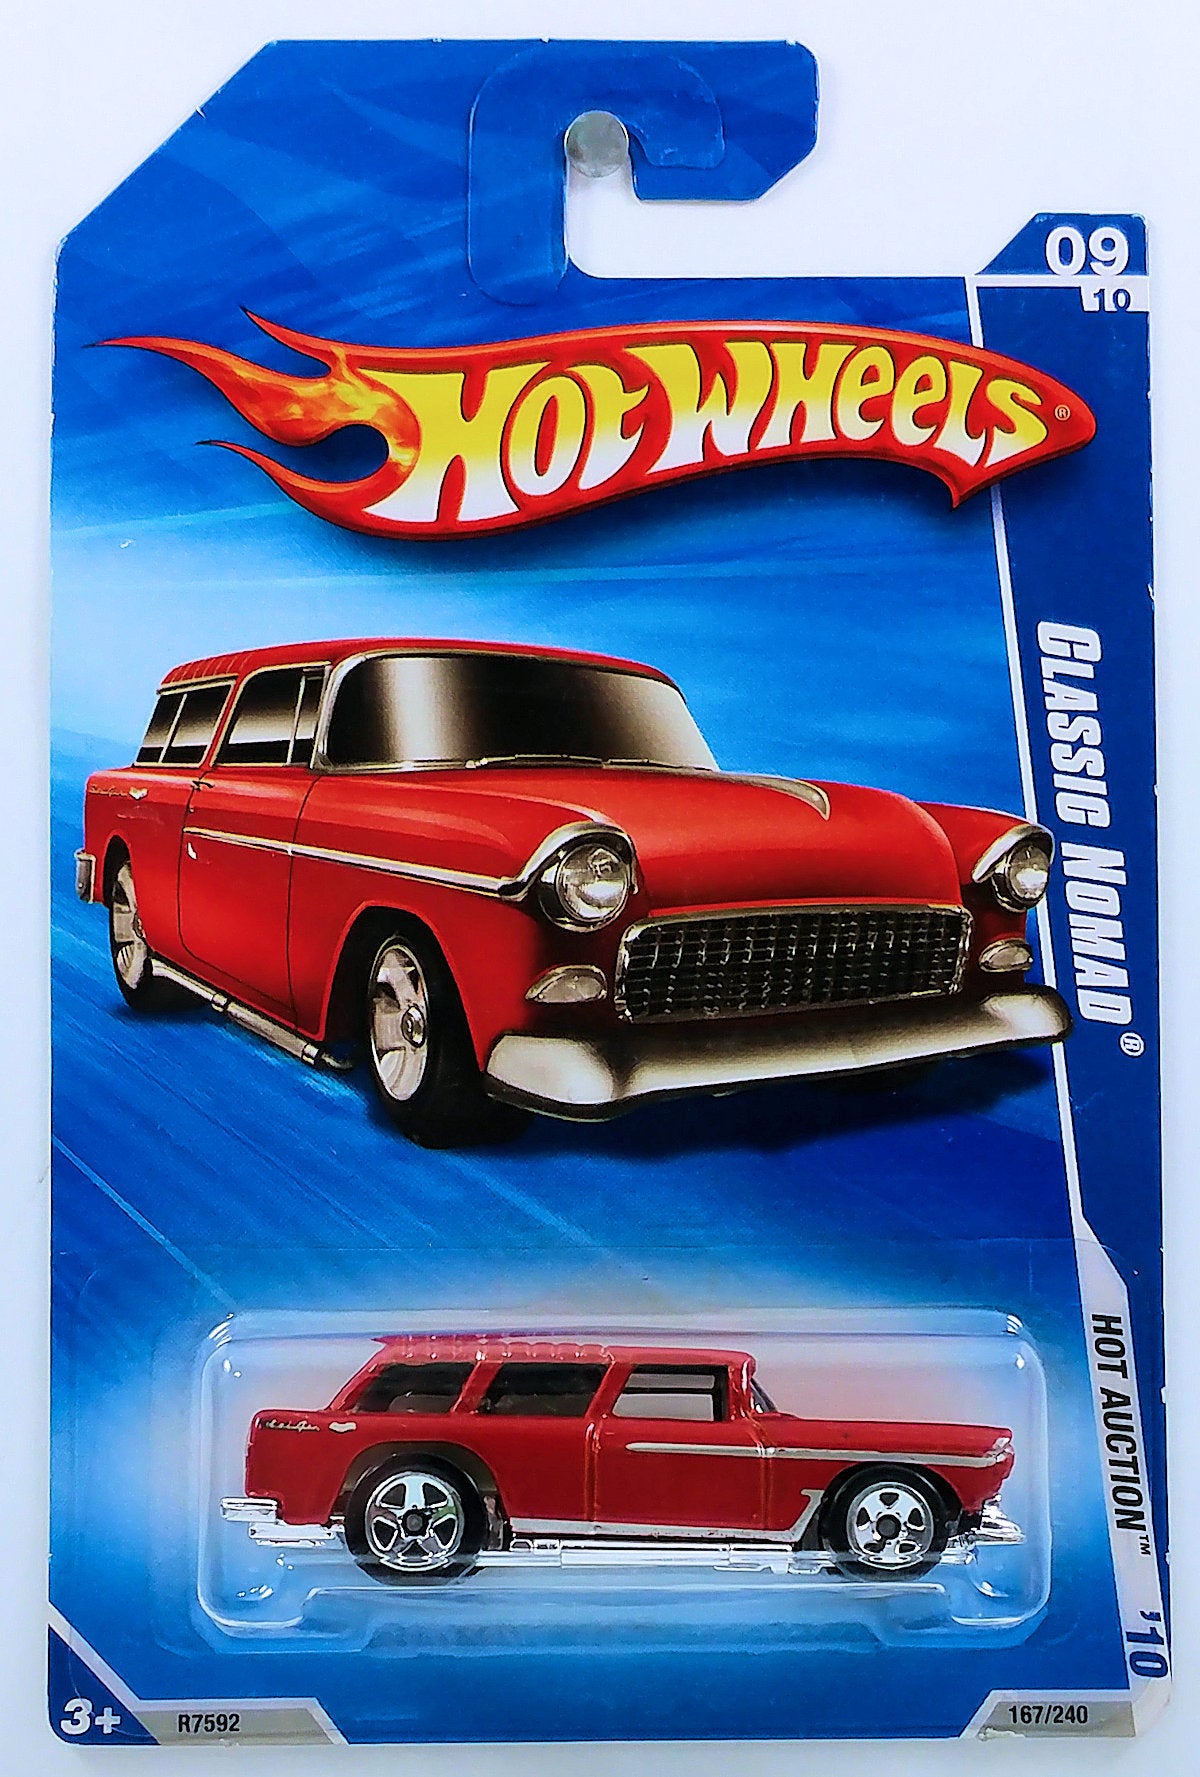 Hot Wheels 2010 - Collector # 167/240 - Hot Auction 9/10 - Classic Nomad - Metallic Red